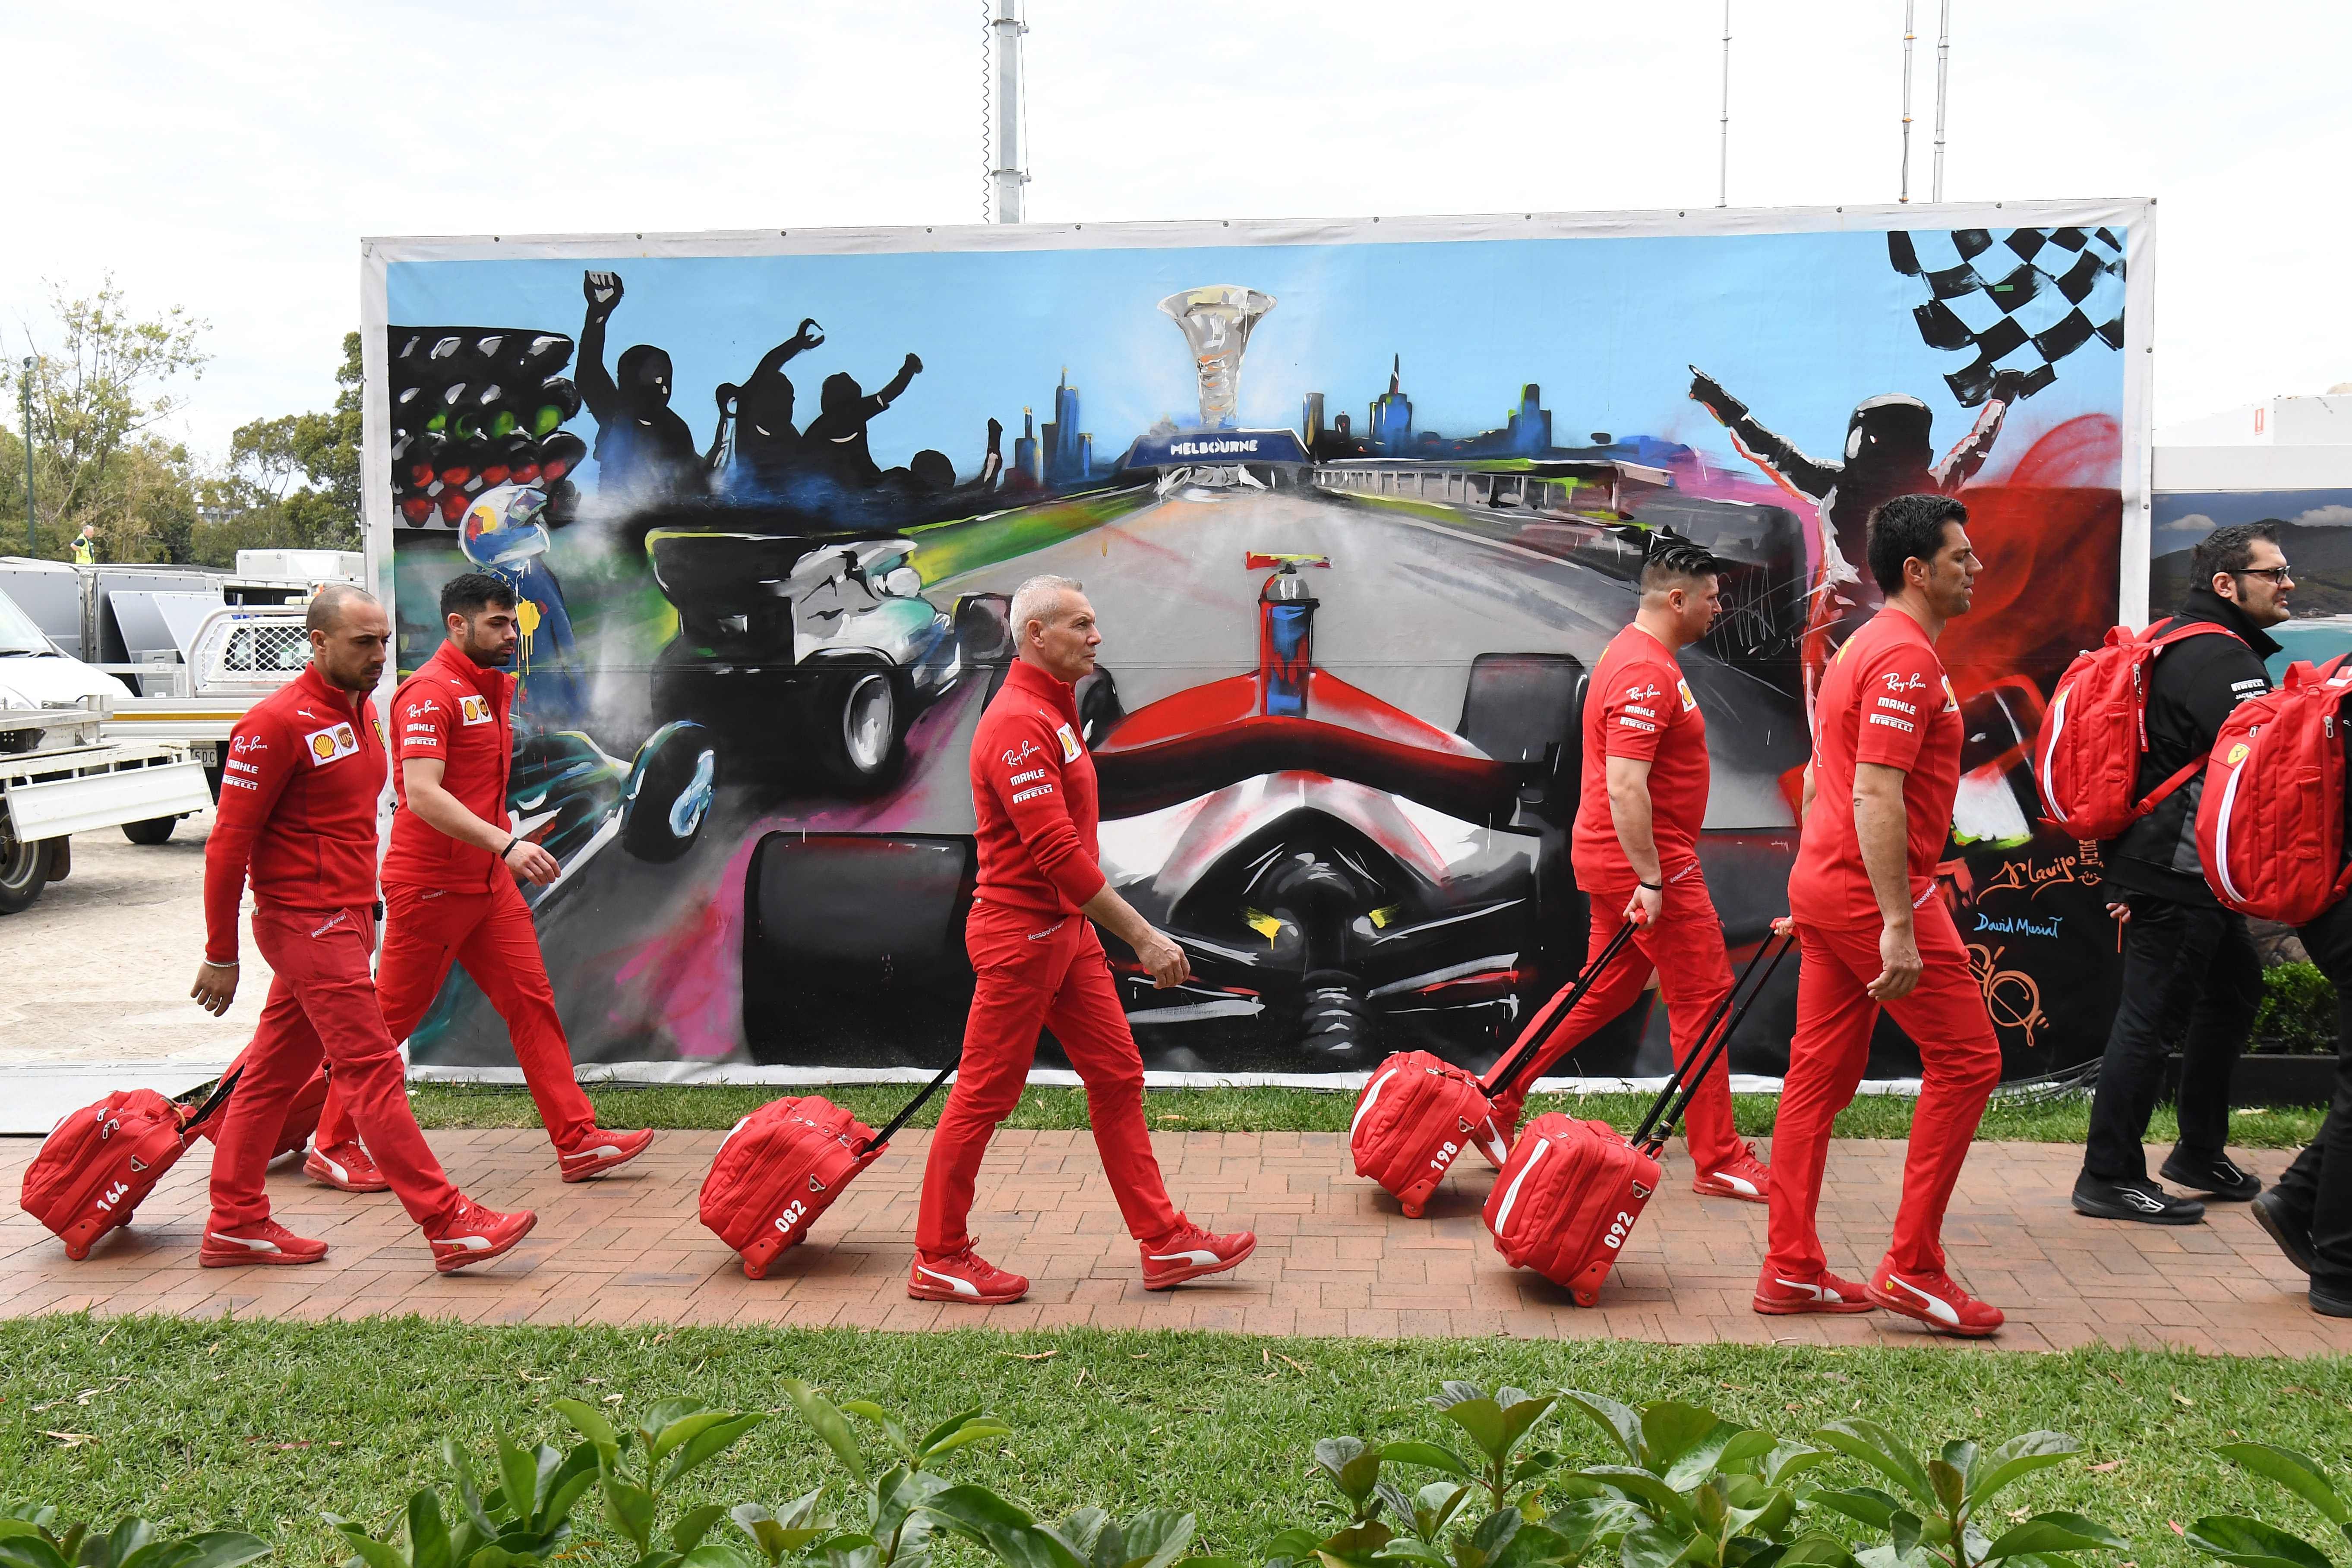 Members of the Ferrari team arrive to pack up their equipment after the Formula One Australian Grand Prix was cancelled in Melbourne on March 13, 2020. (Credit: AFP)